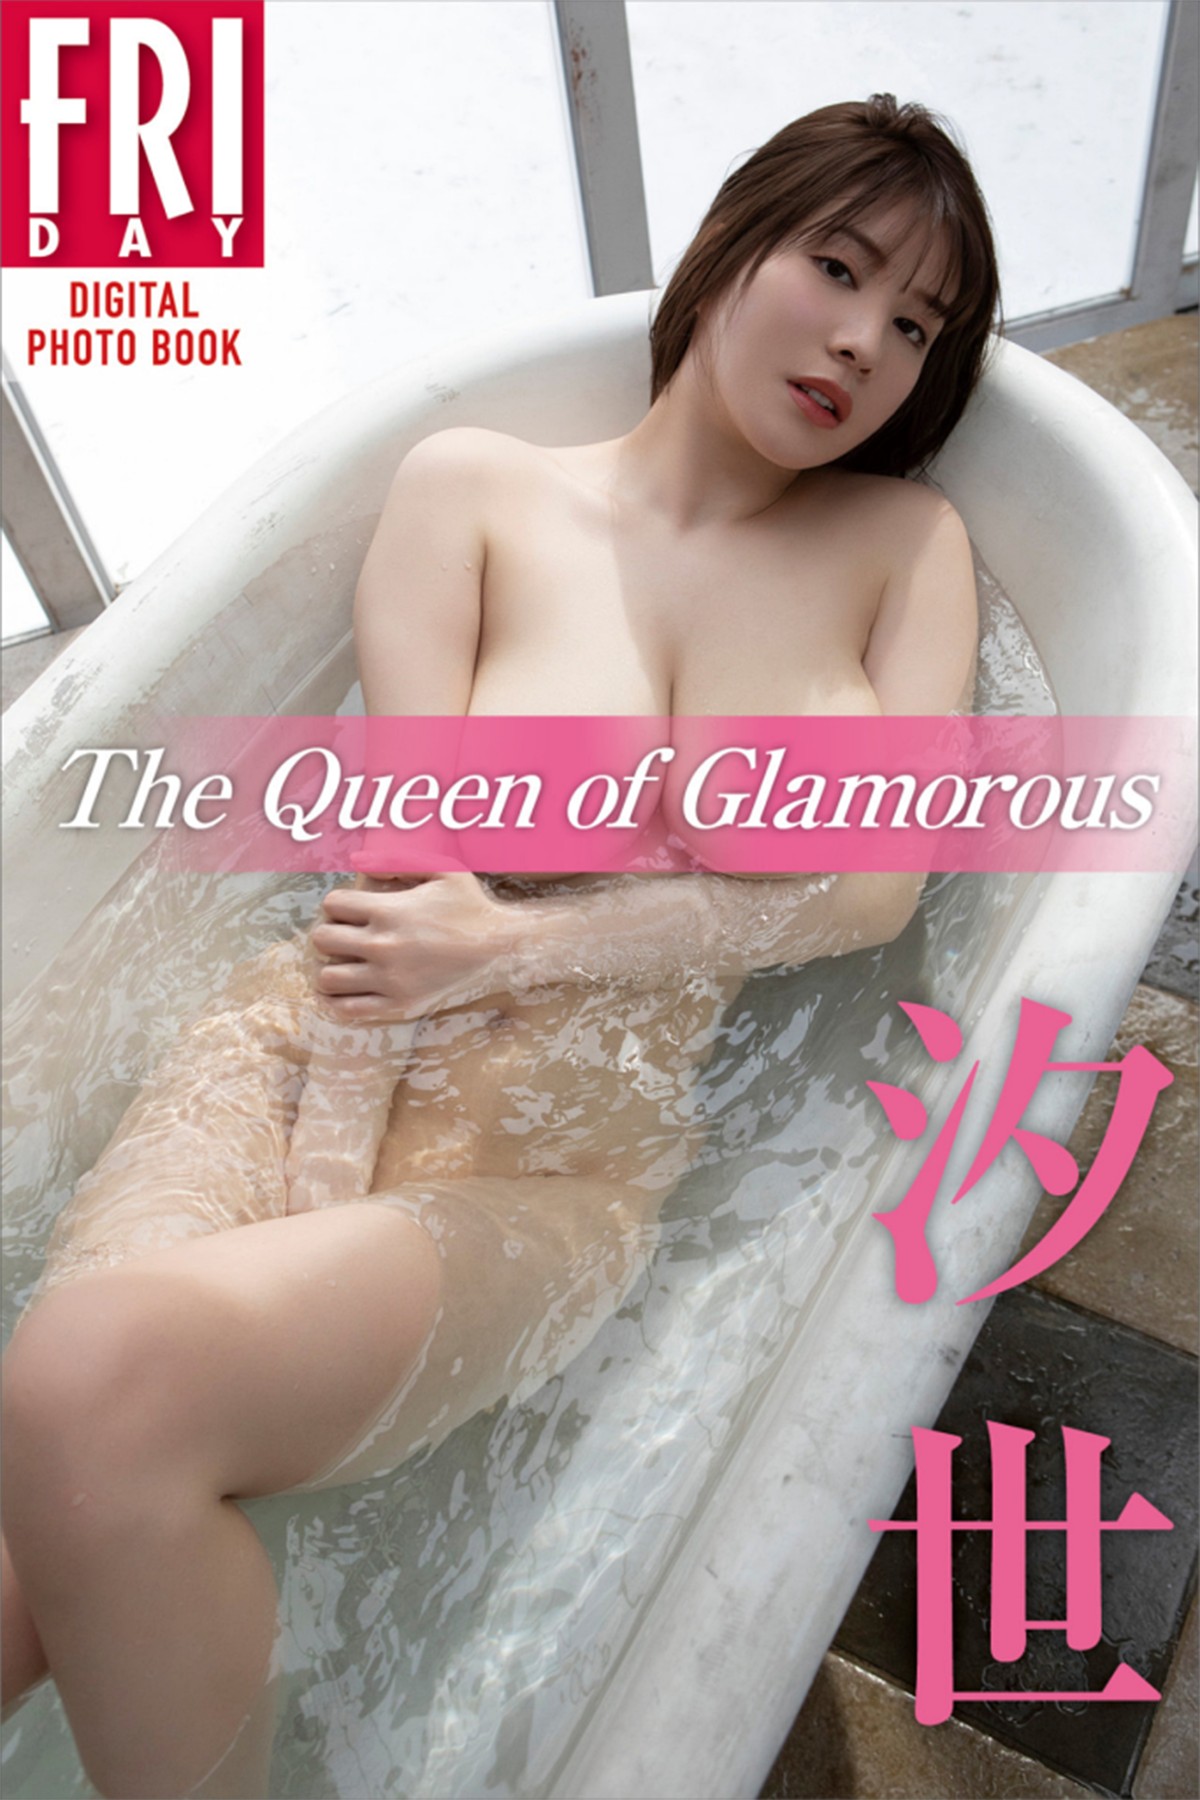 FRIDAY Digital Photo Book Shioyo 汐世 – The Queen Of Glamorous